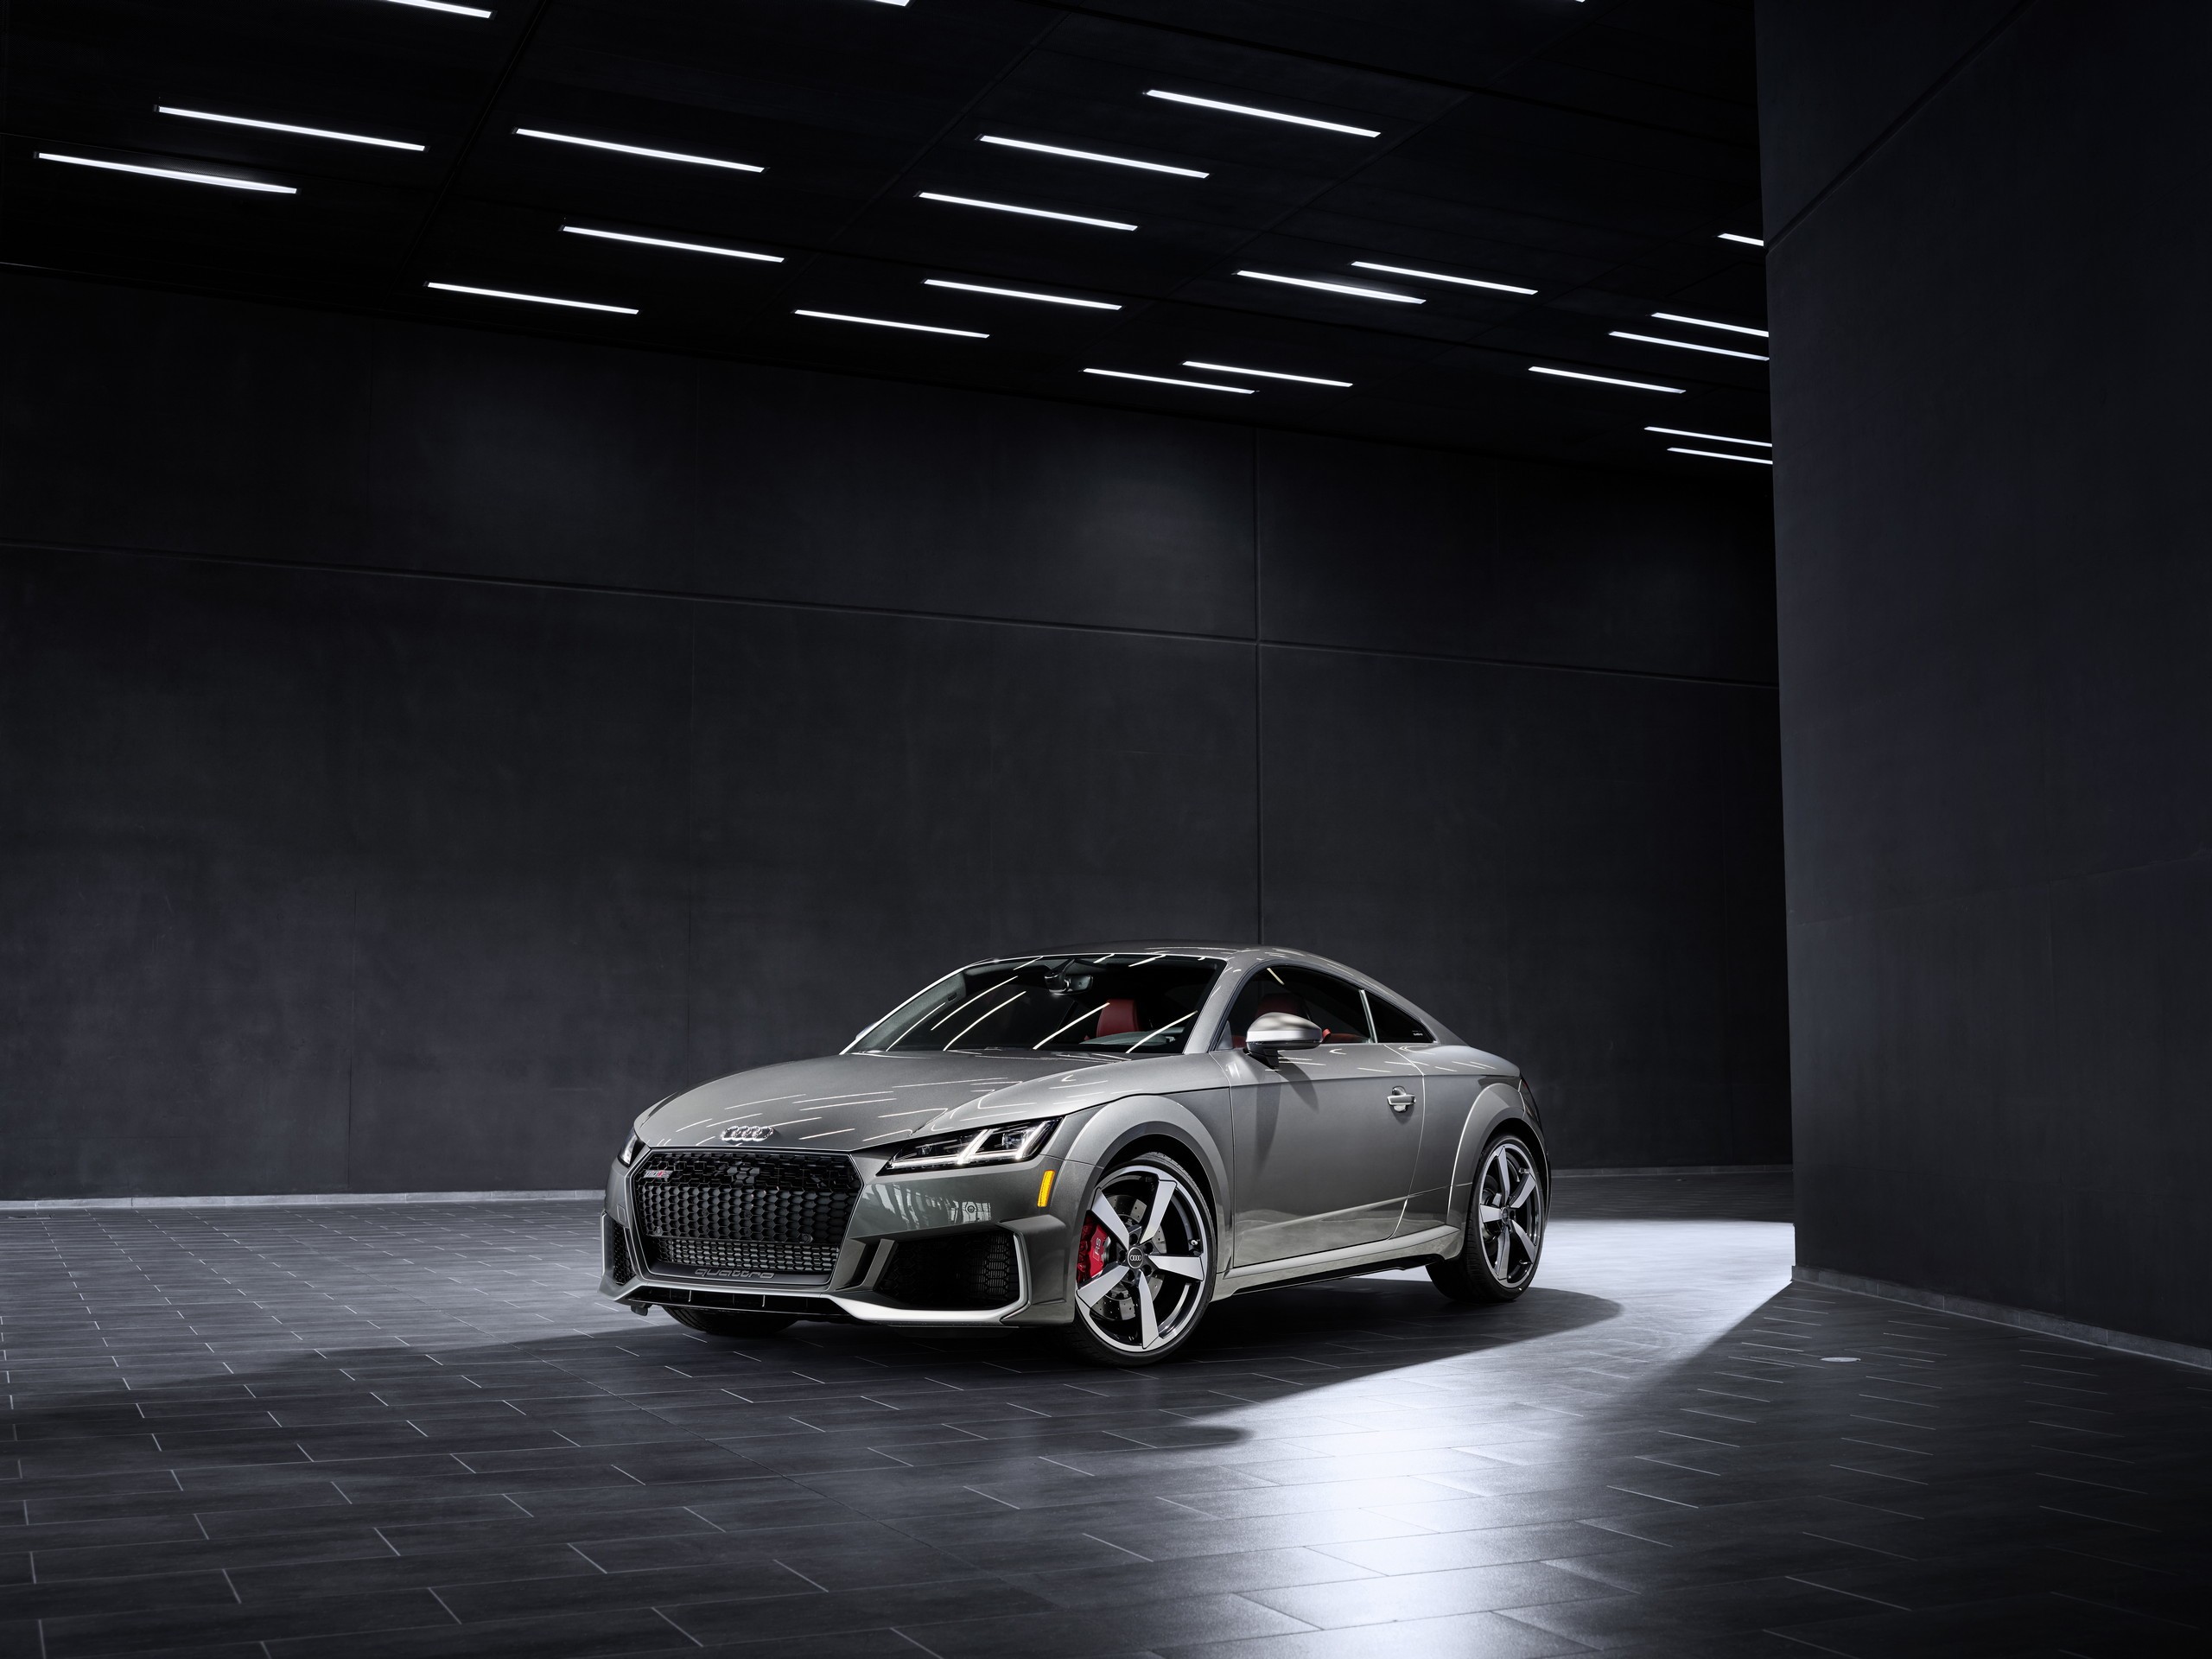 Audi TT Not Dead Yet As New Special Edition Launches In Spain